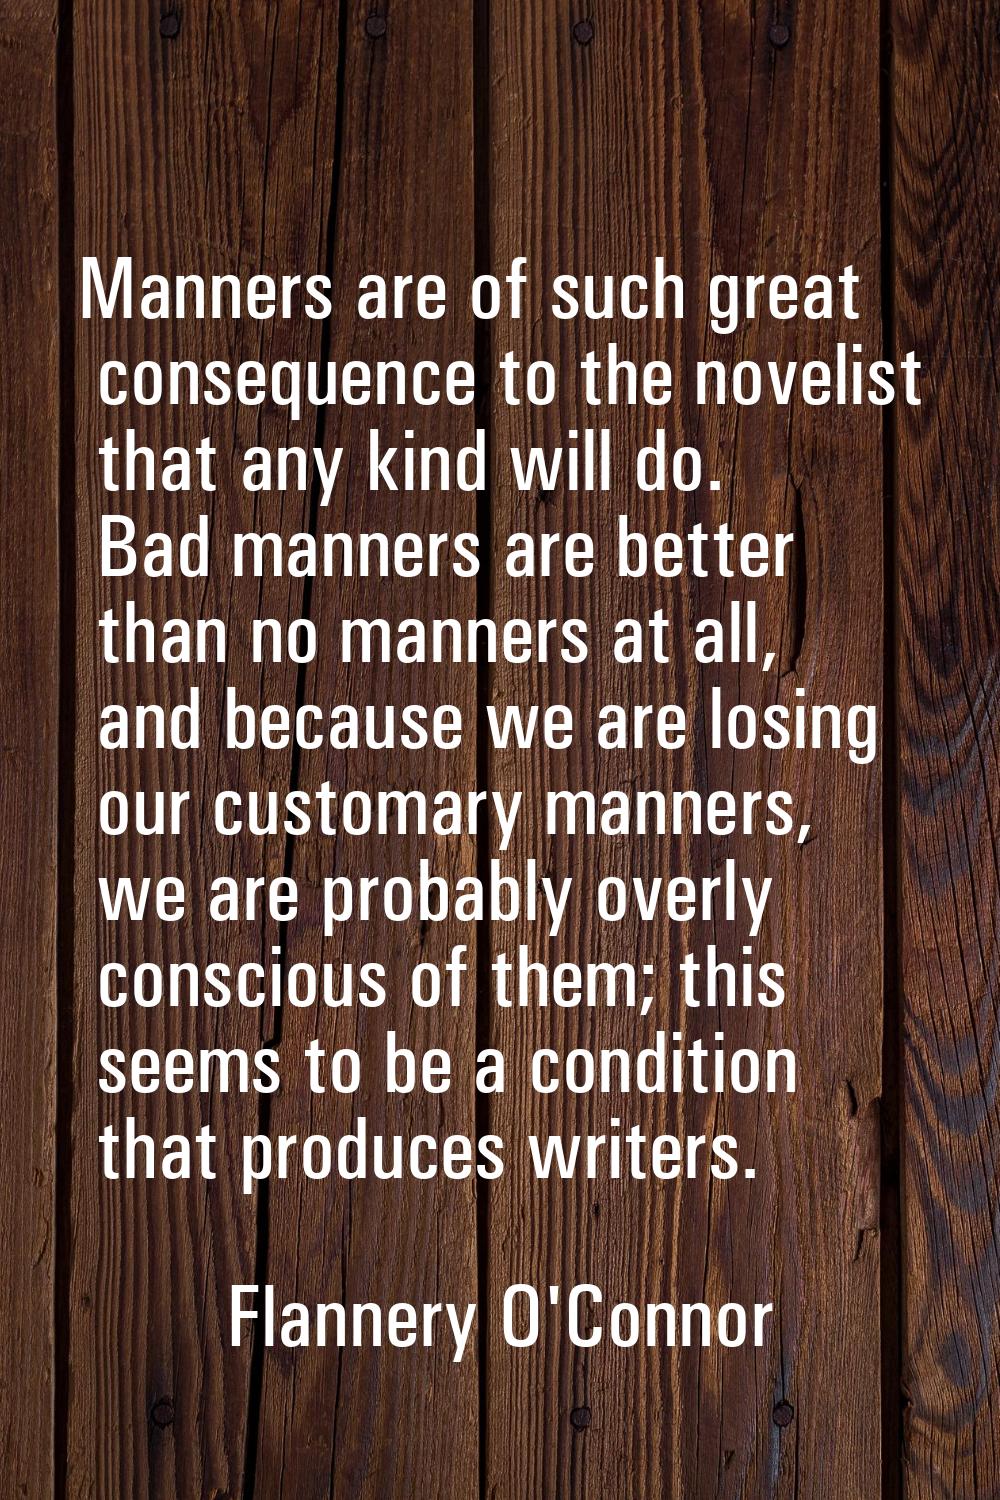 Manners are of such great consequence to the novelist that any kind will do. Bad manners are better